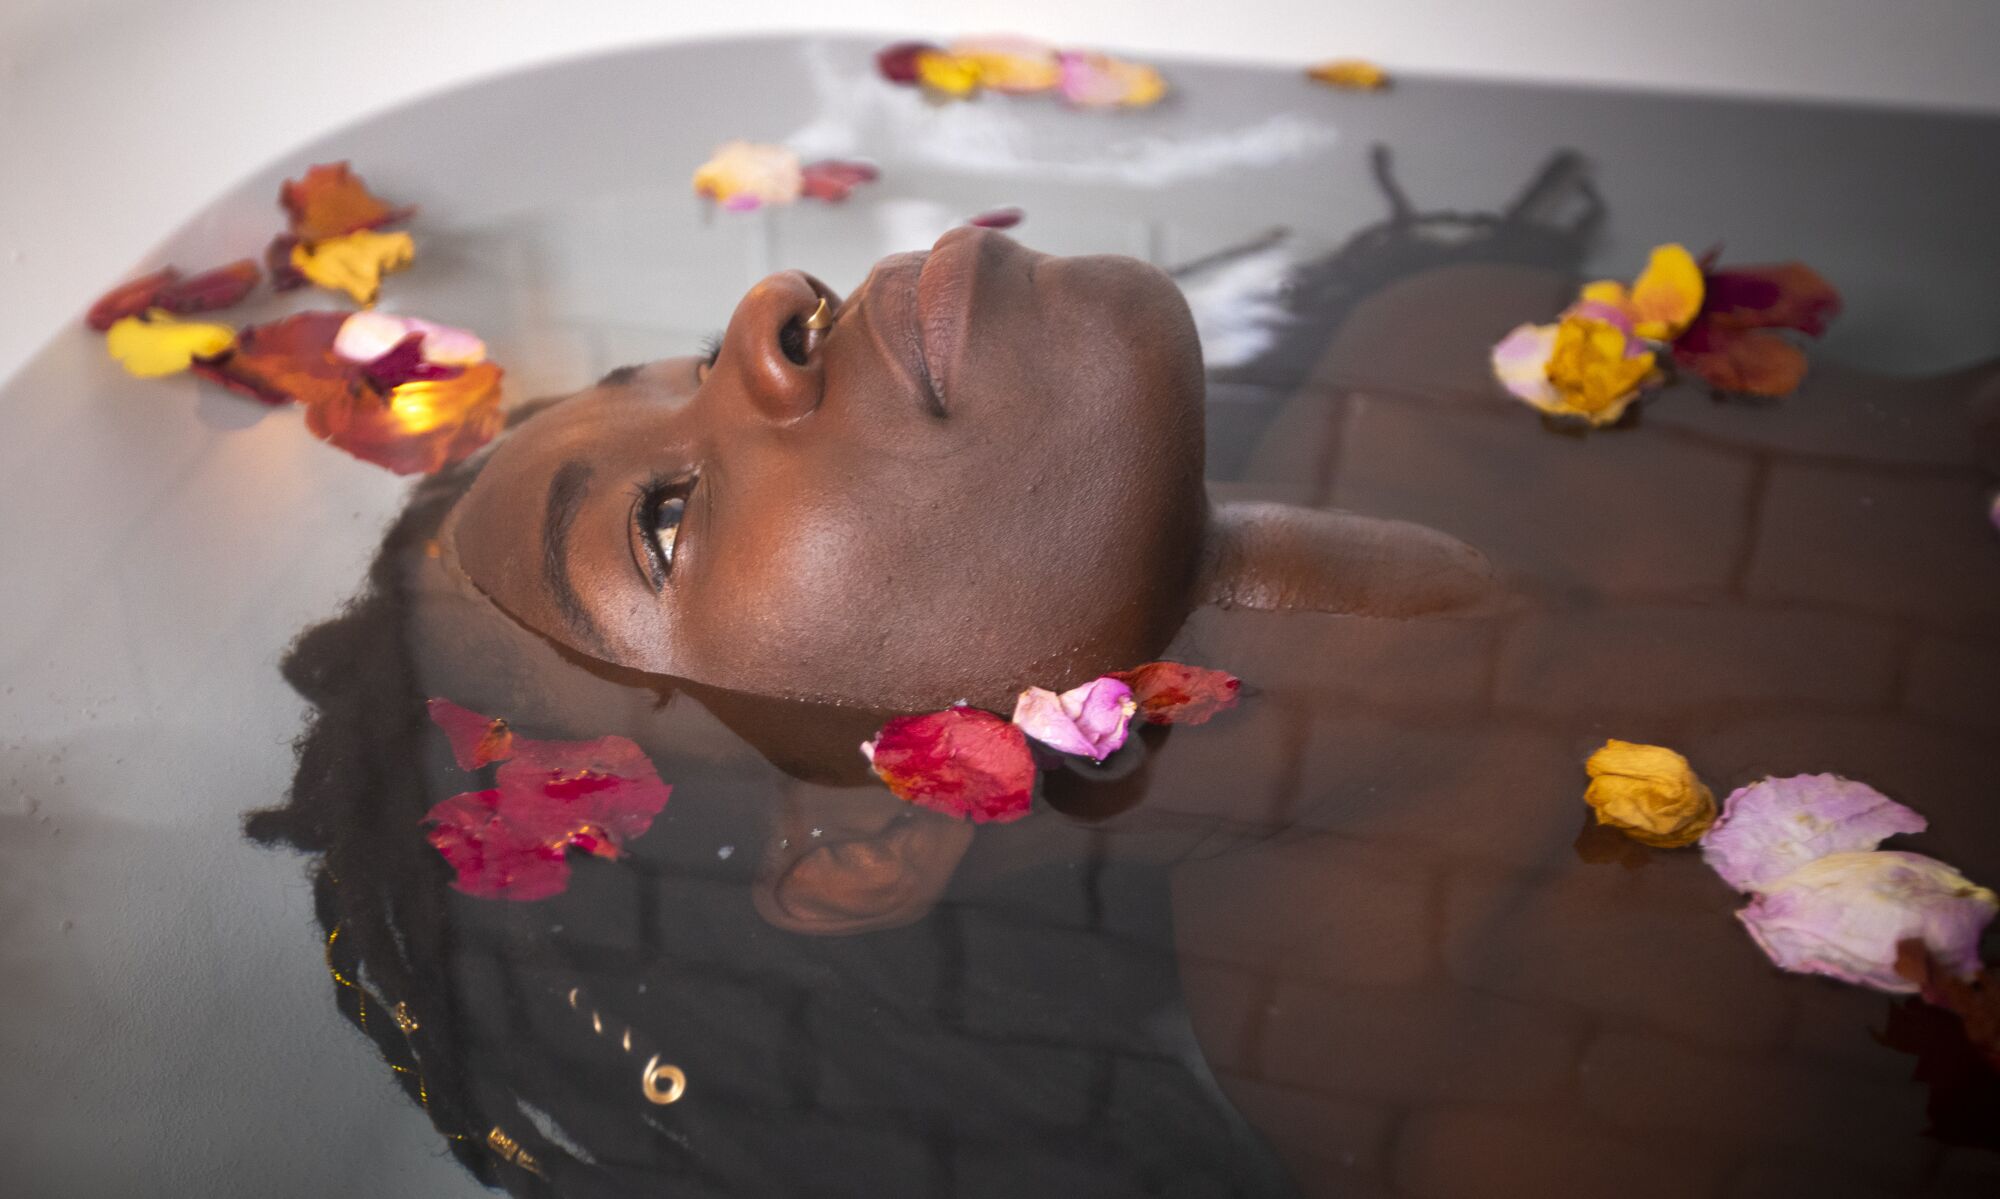 Alua Arthur takes a bath as a ritual, by soaking that includes candles, rose petals and epsom salt.